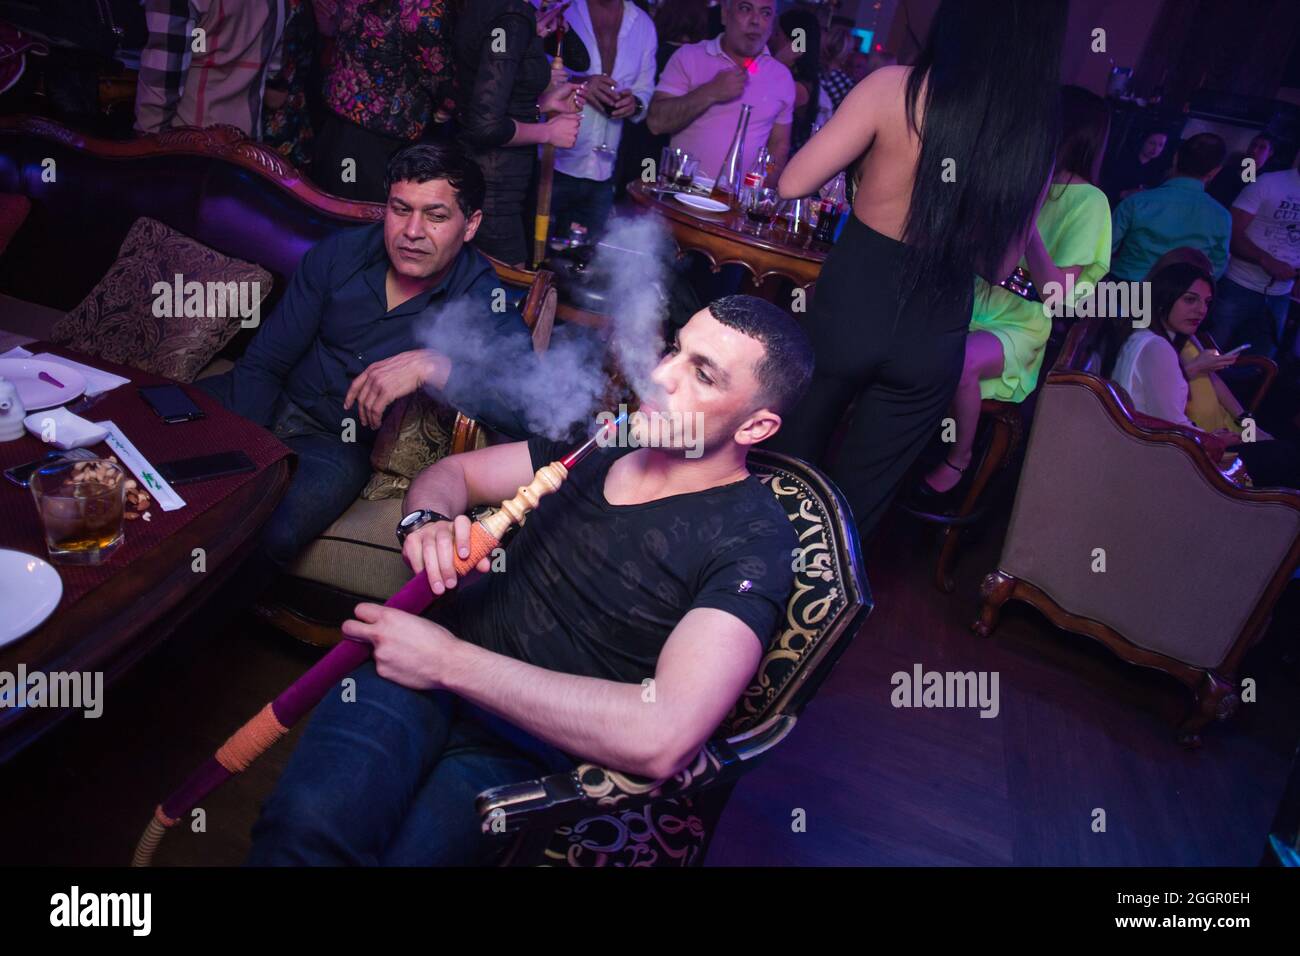 Odessa, Ukraine April 26, 2014: Ministerium night club. People smoking hookah during concert in night club party. Man and woman have fun at club Stock Photo